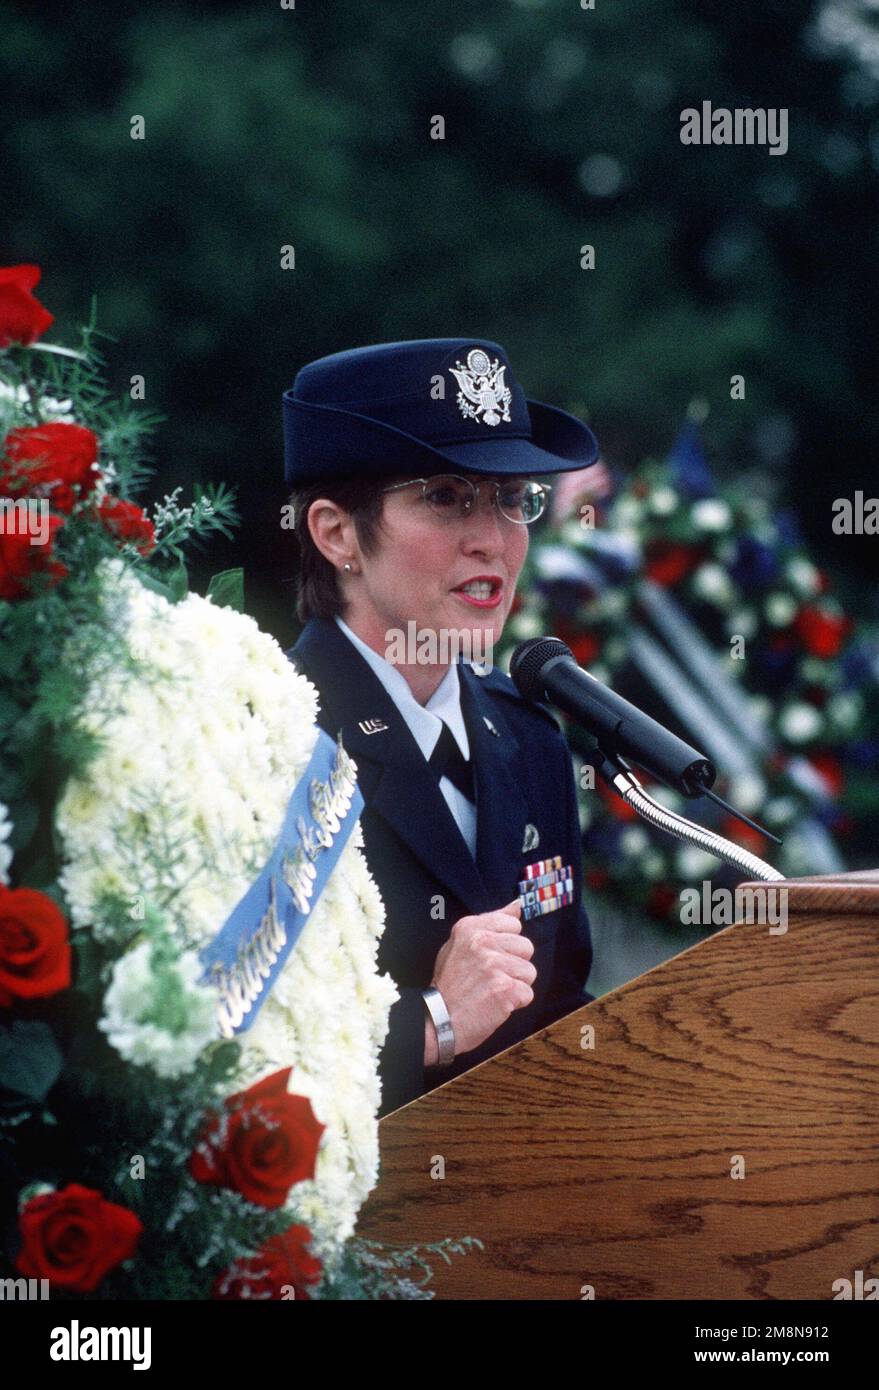 Right side front medium shot from the chest up of USAF Captain Pat Blassie as she speaks a few words about her brother, USAF First Lieutenant Michael Blassie. CAPT Blassie serves in the Air Force Reserves in the Pentagon. 1LT Blassie was shot down and killed in South Vietnam on May 11th, 1972. A mix up with dog tags and body identification led the remains listed as Unknown and buried in the tomb of the Unknown Soldier at Arlington National Cemetery (Not shown). Using DNA testing on May 14th, 1998, the remains were indentified as those of 1LT Blassie and services were held in his honor. This im Stock Photo